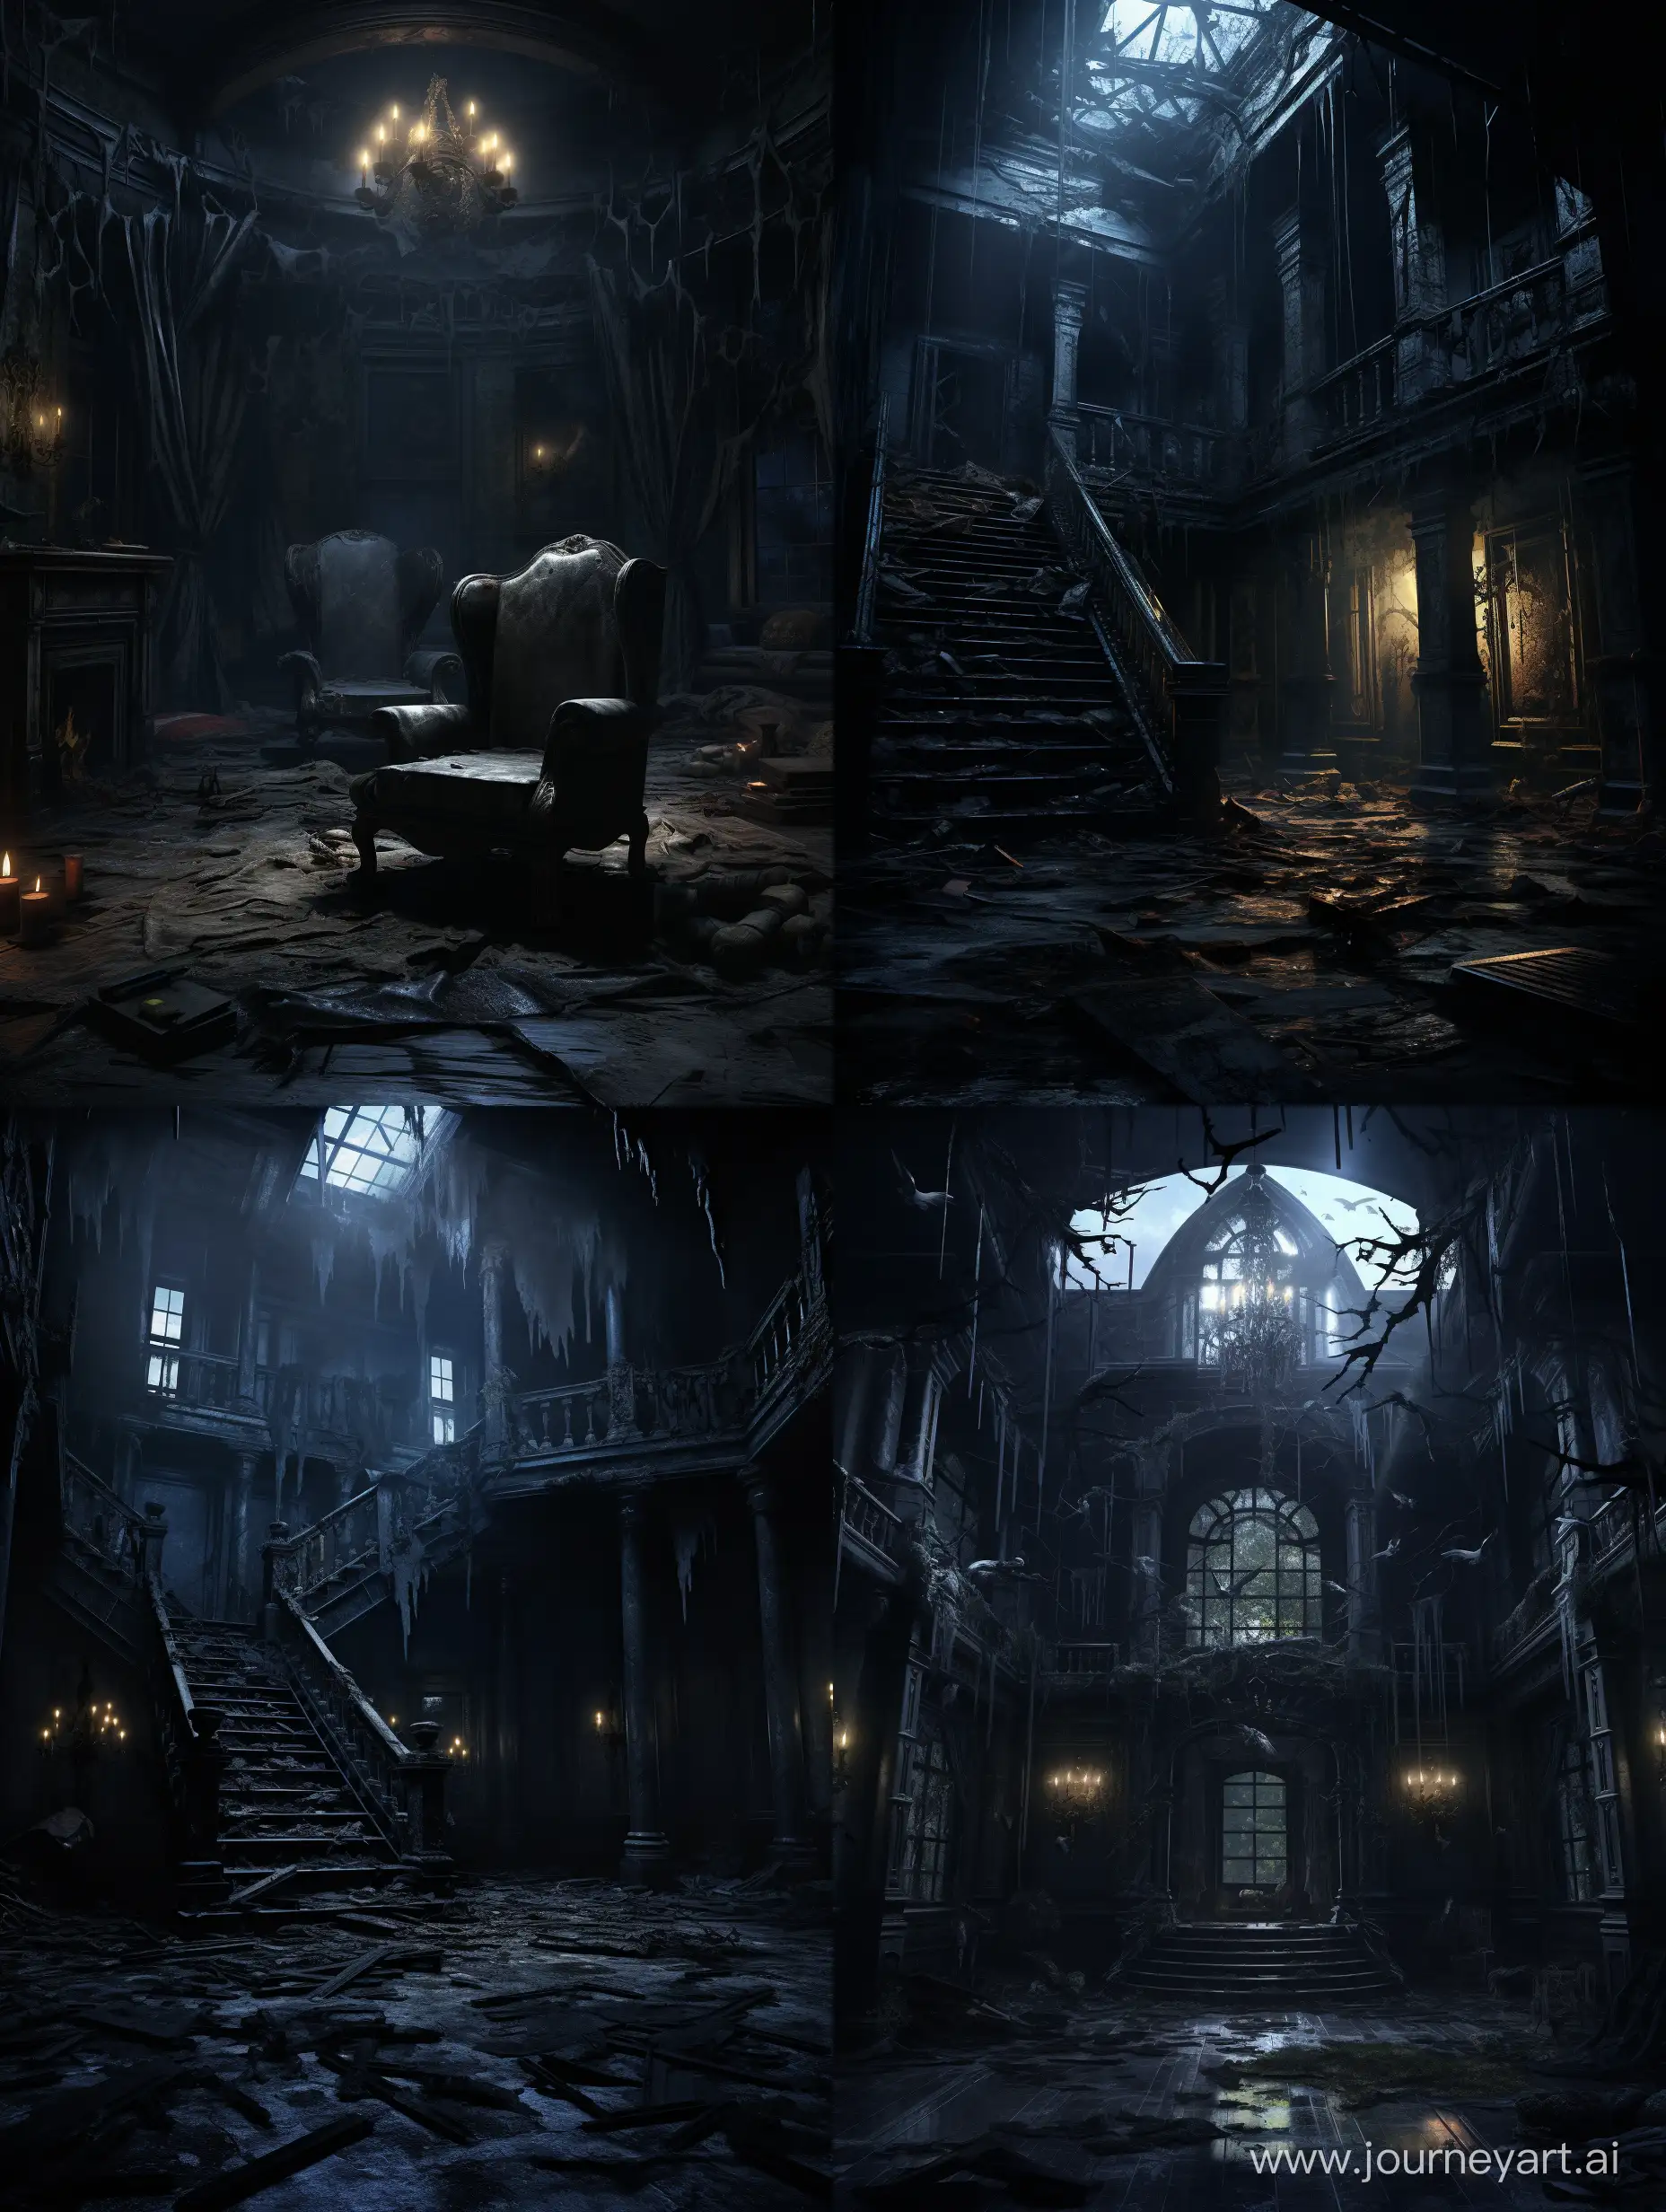 Scene description: The protagonist lights the way with a flashlight, its beam cutting through the dimness inside, revealing dust-covered furniture and cobwebs. The air is thick with the smell of mold, and every step echoes in the interior, creating a suffocating and uneasy feeling. The mansion's windows are covered with thick curtains, allowing only slivers of moonlight to seep through.